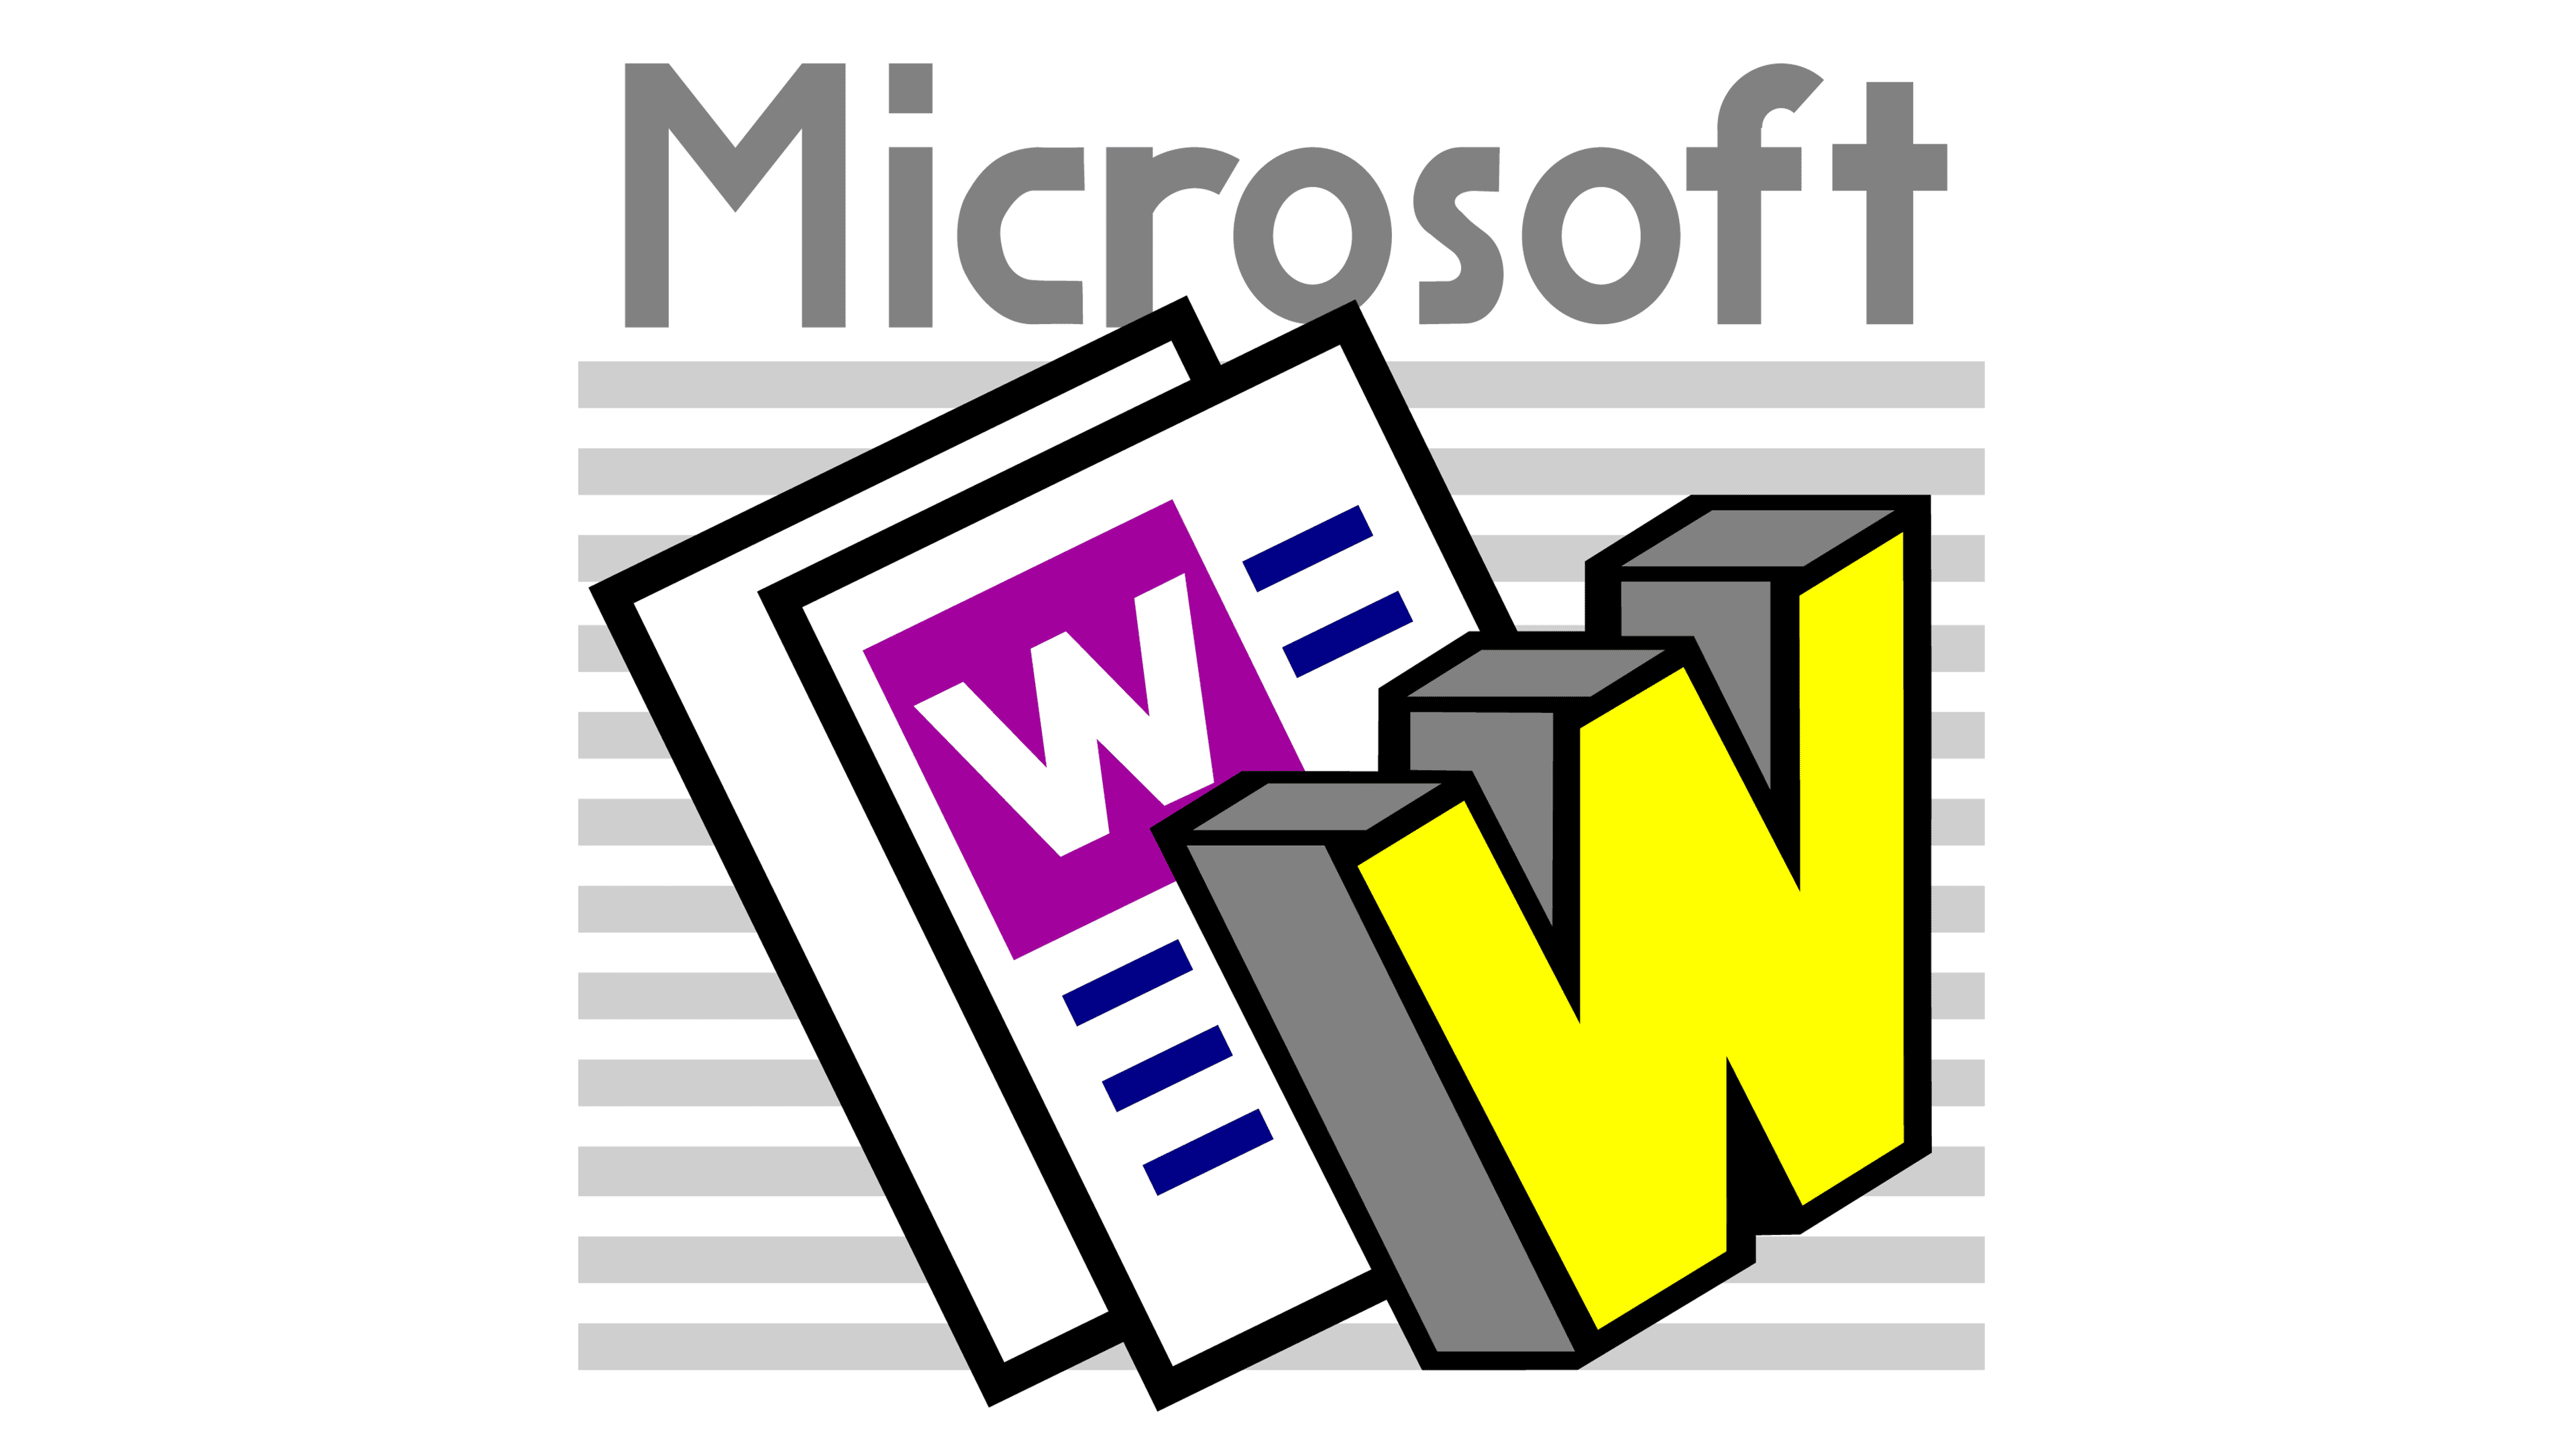 how to design a logo using microsoft word